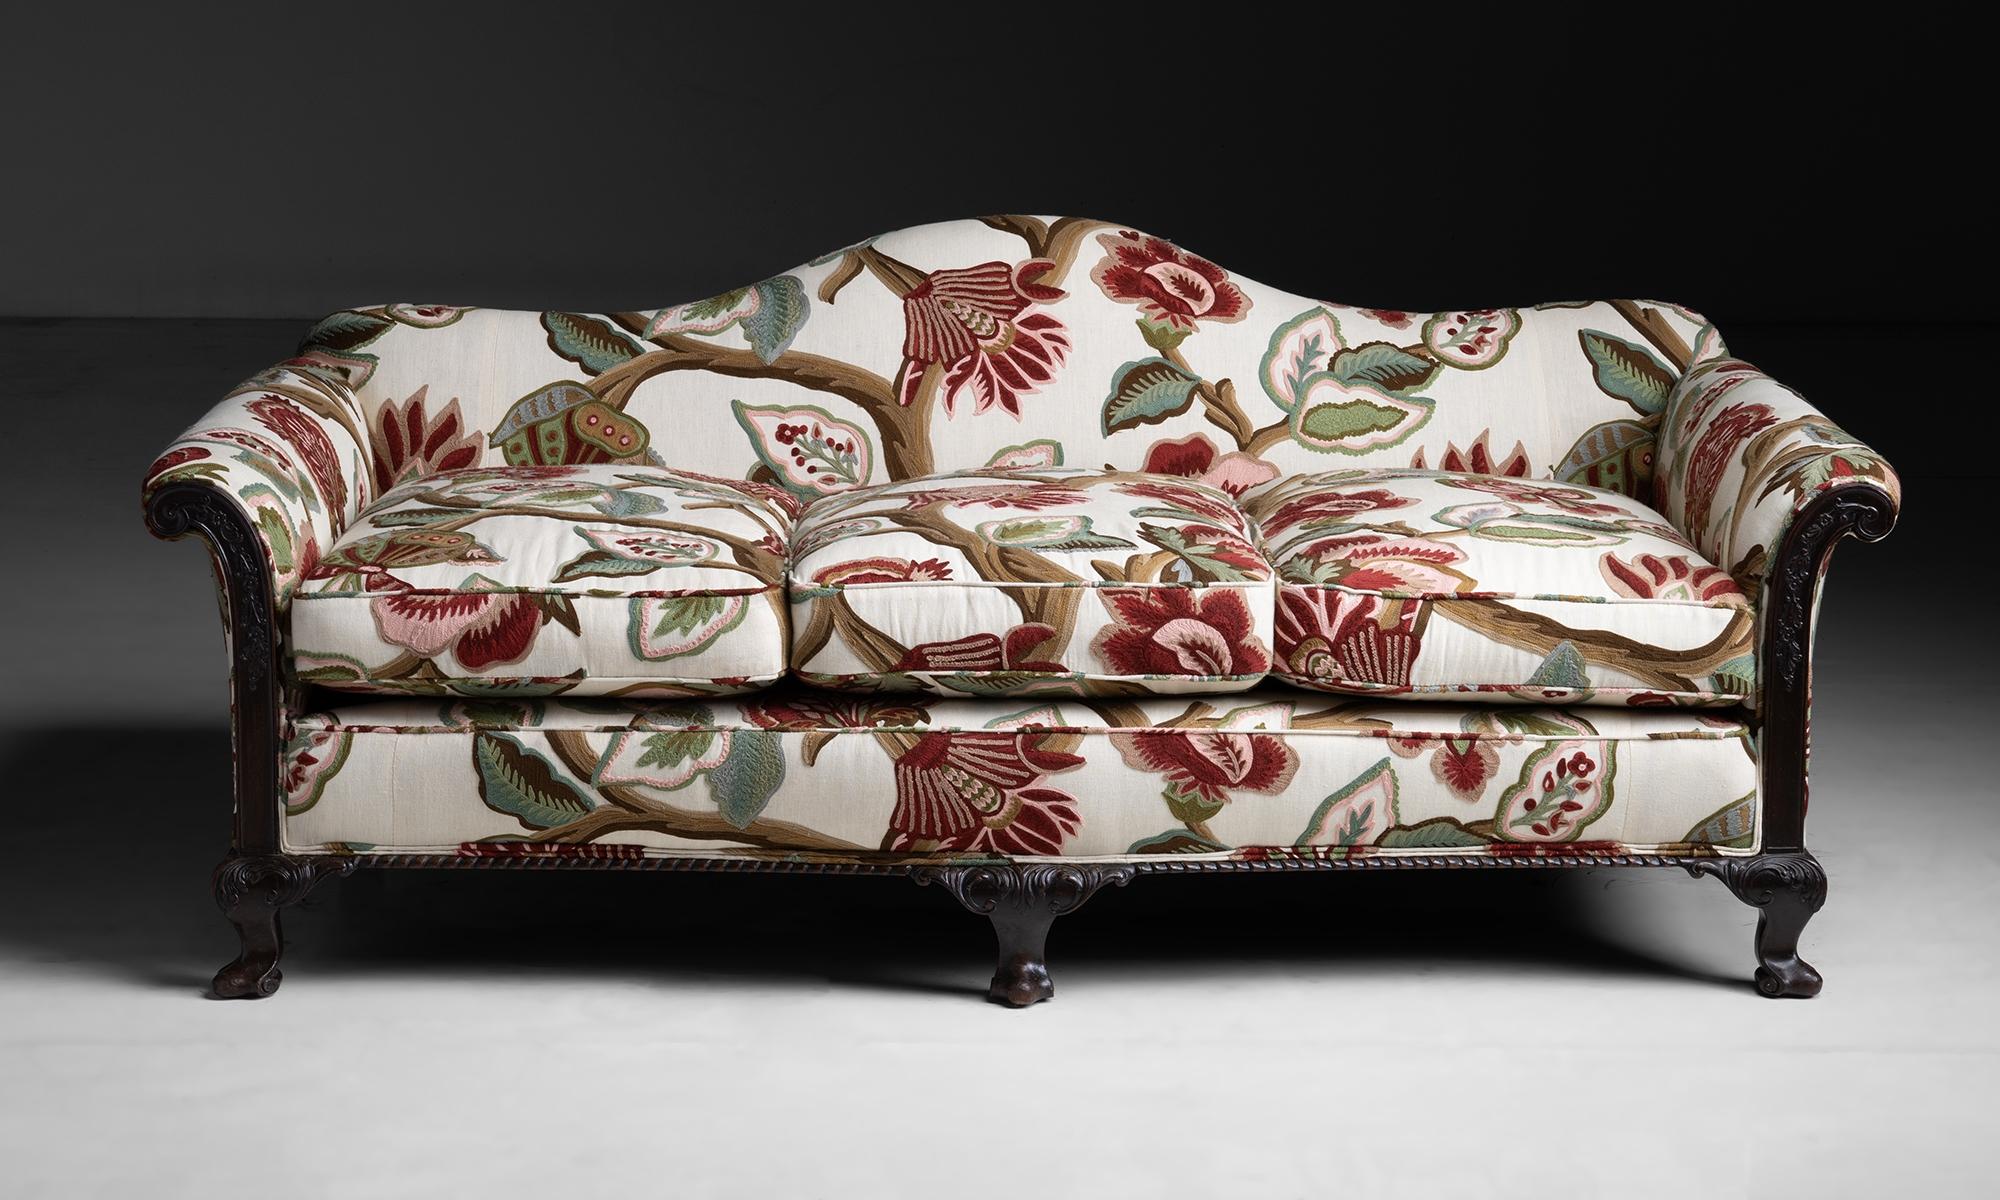 Sofa in Embroidered Linen by Pierre Frey

England circa 1900

Low camelback sofa with carved wooden frame. Newly upholstered in a floral embroidered linen.

73.5”L x 39”d x 29”h x 19”seat

Ref. SOFA260